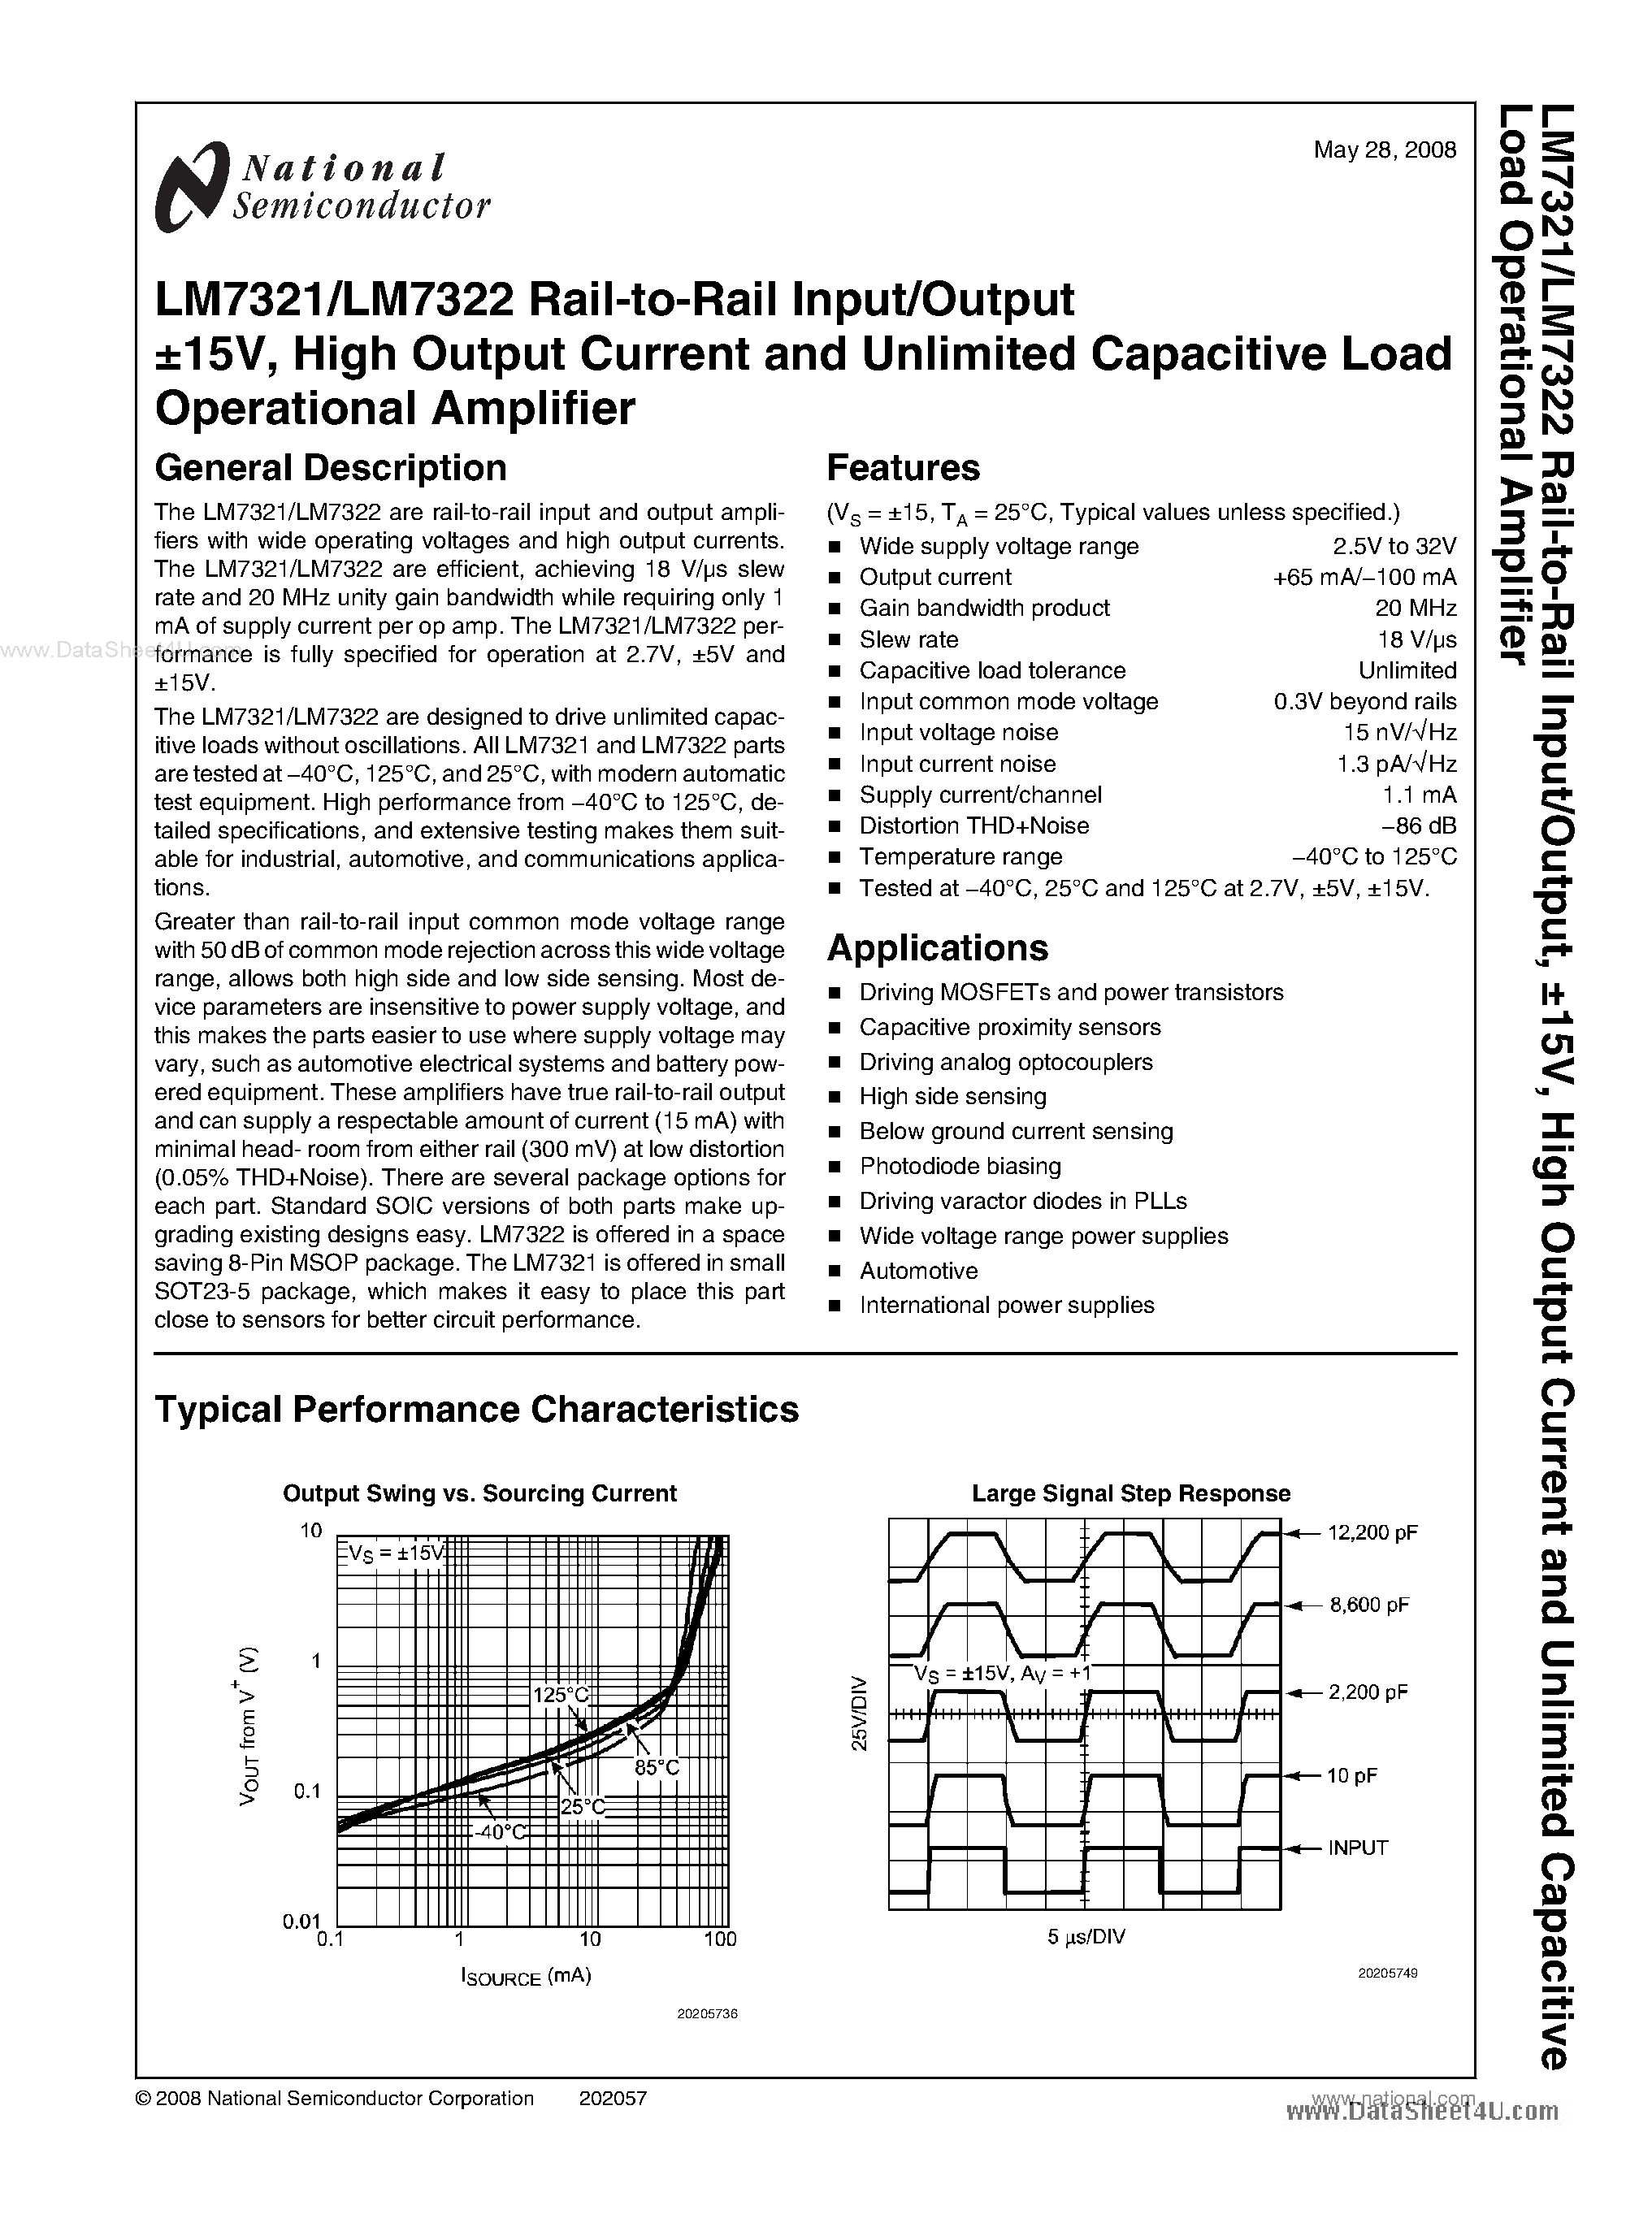 Datasheet LM7321 - (LM7321 / LM7322) High Output Current and Unlimited Capacitive Load Operational Amplifier page 1